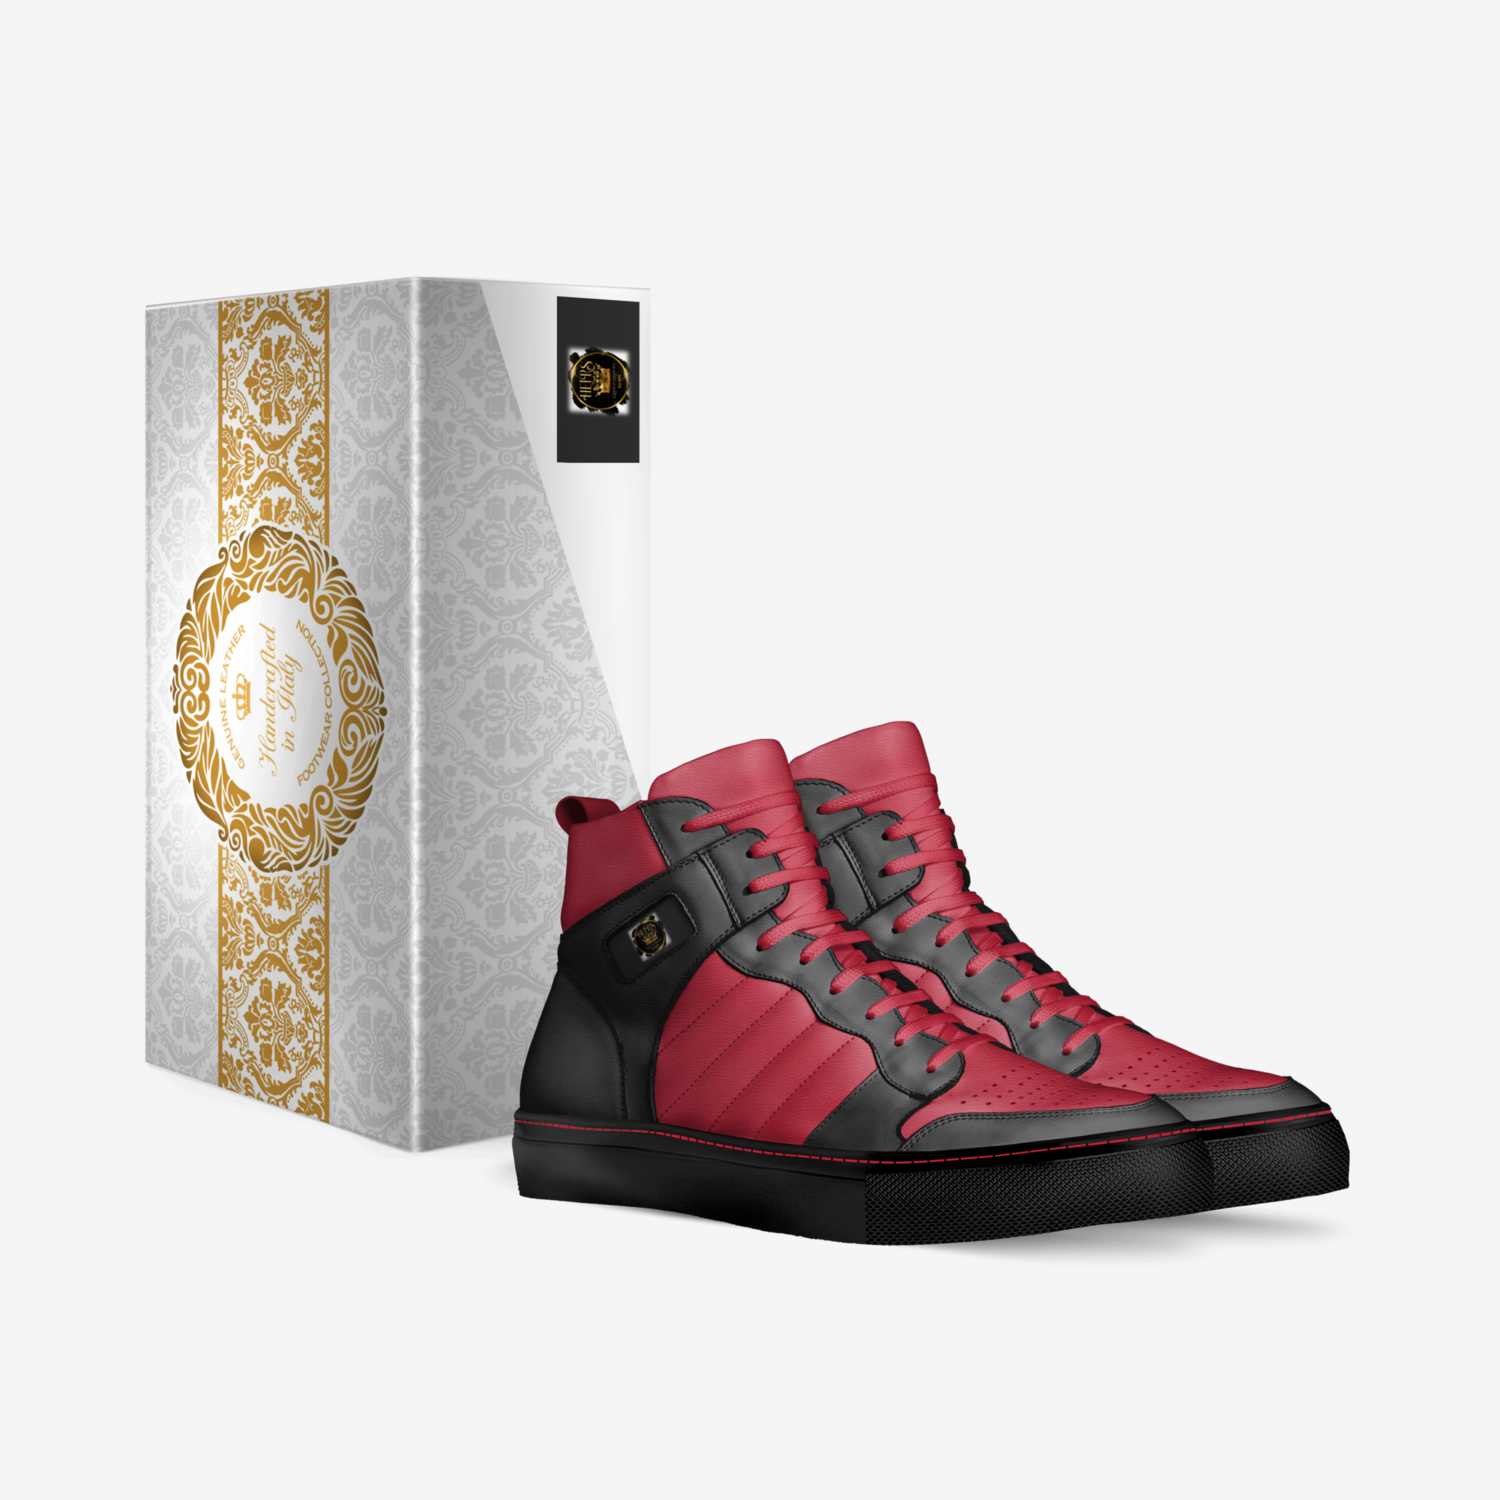 HEIRS custom made in Italy shoes by Reginald Farrow Ii | Box view